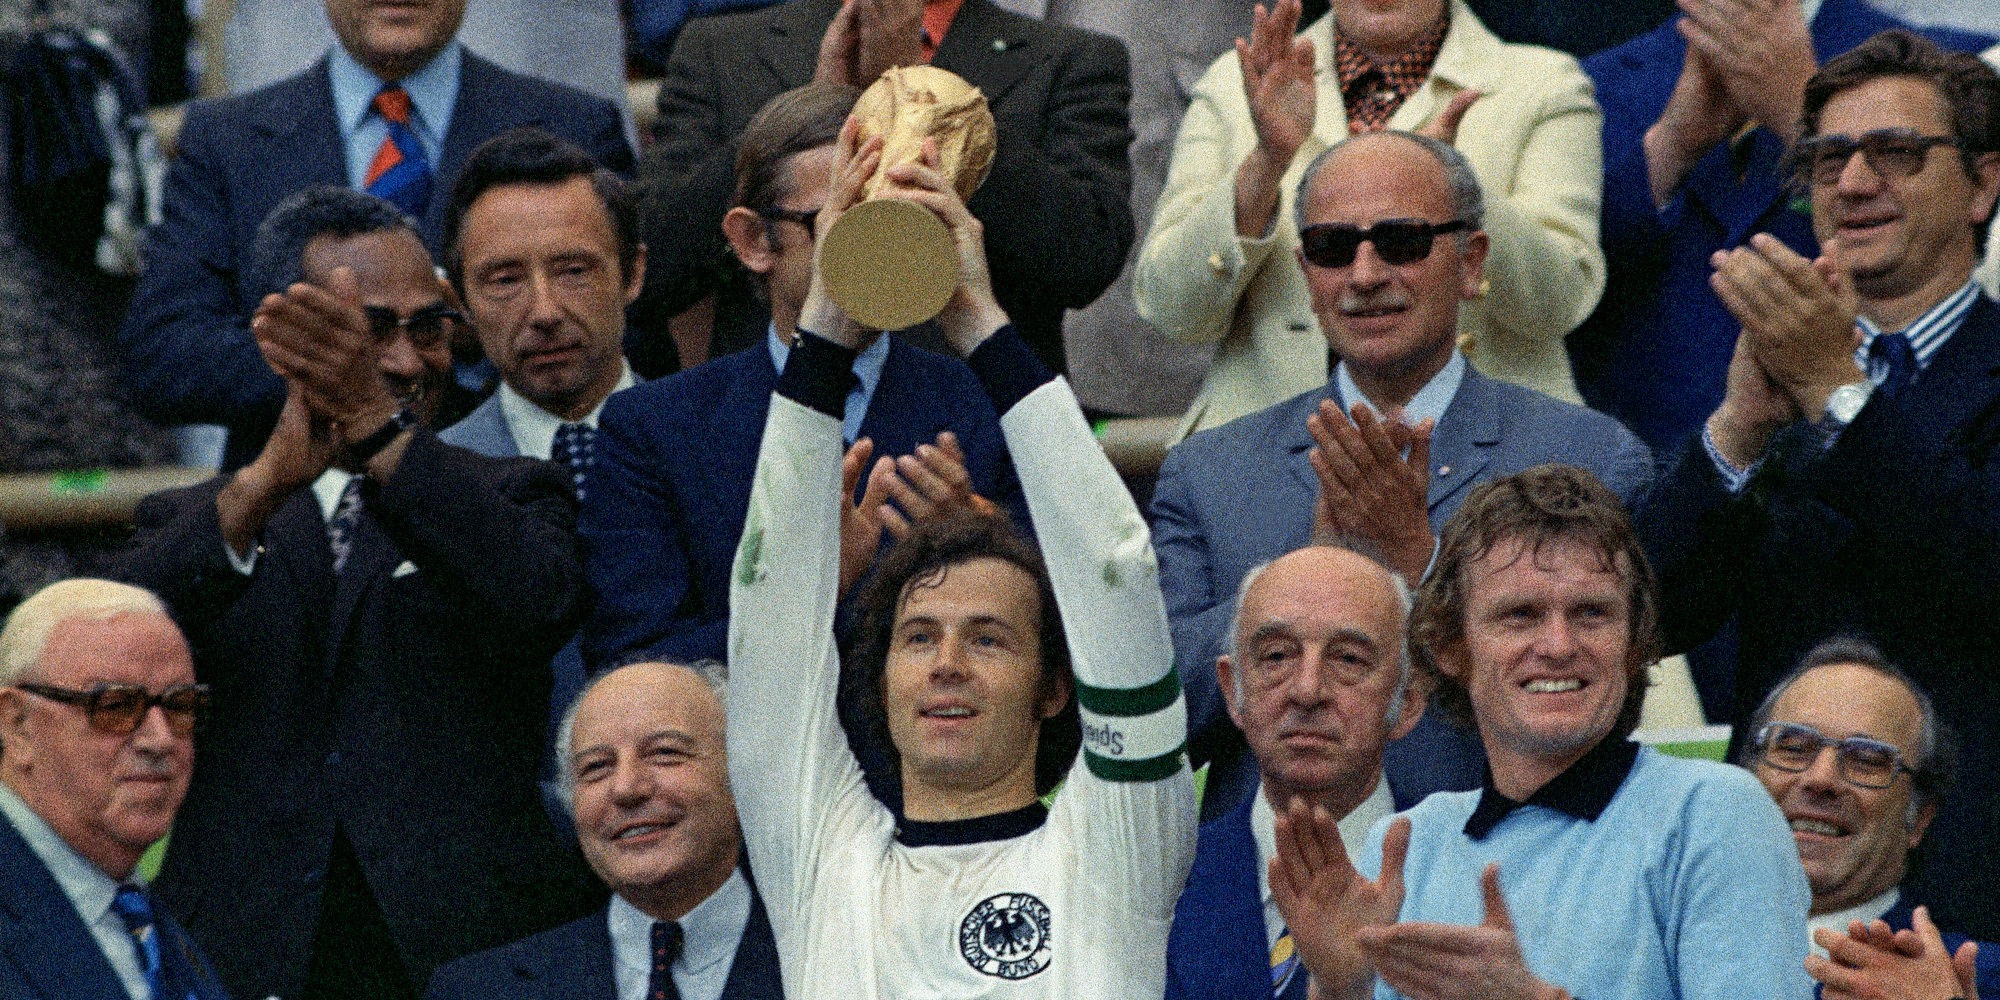 FILE - West Germany captain, Franz Beckenbauer holds up the World Cup trophy after his team defeated the Netherlands 2-1, in the World Cup final soccer match at Munich's Olympic stadium, in West Germany on July 7, 1974. (AP Photo/File)